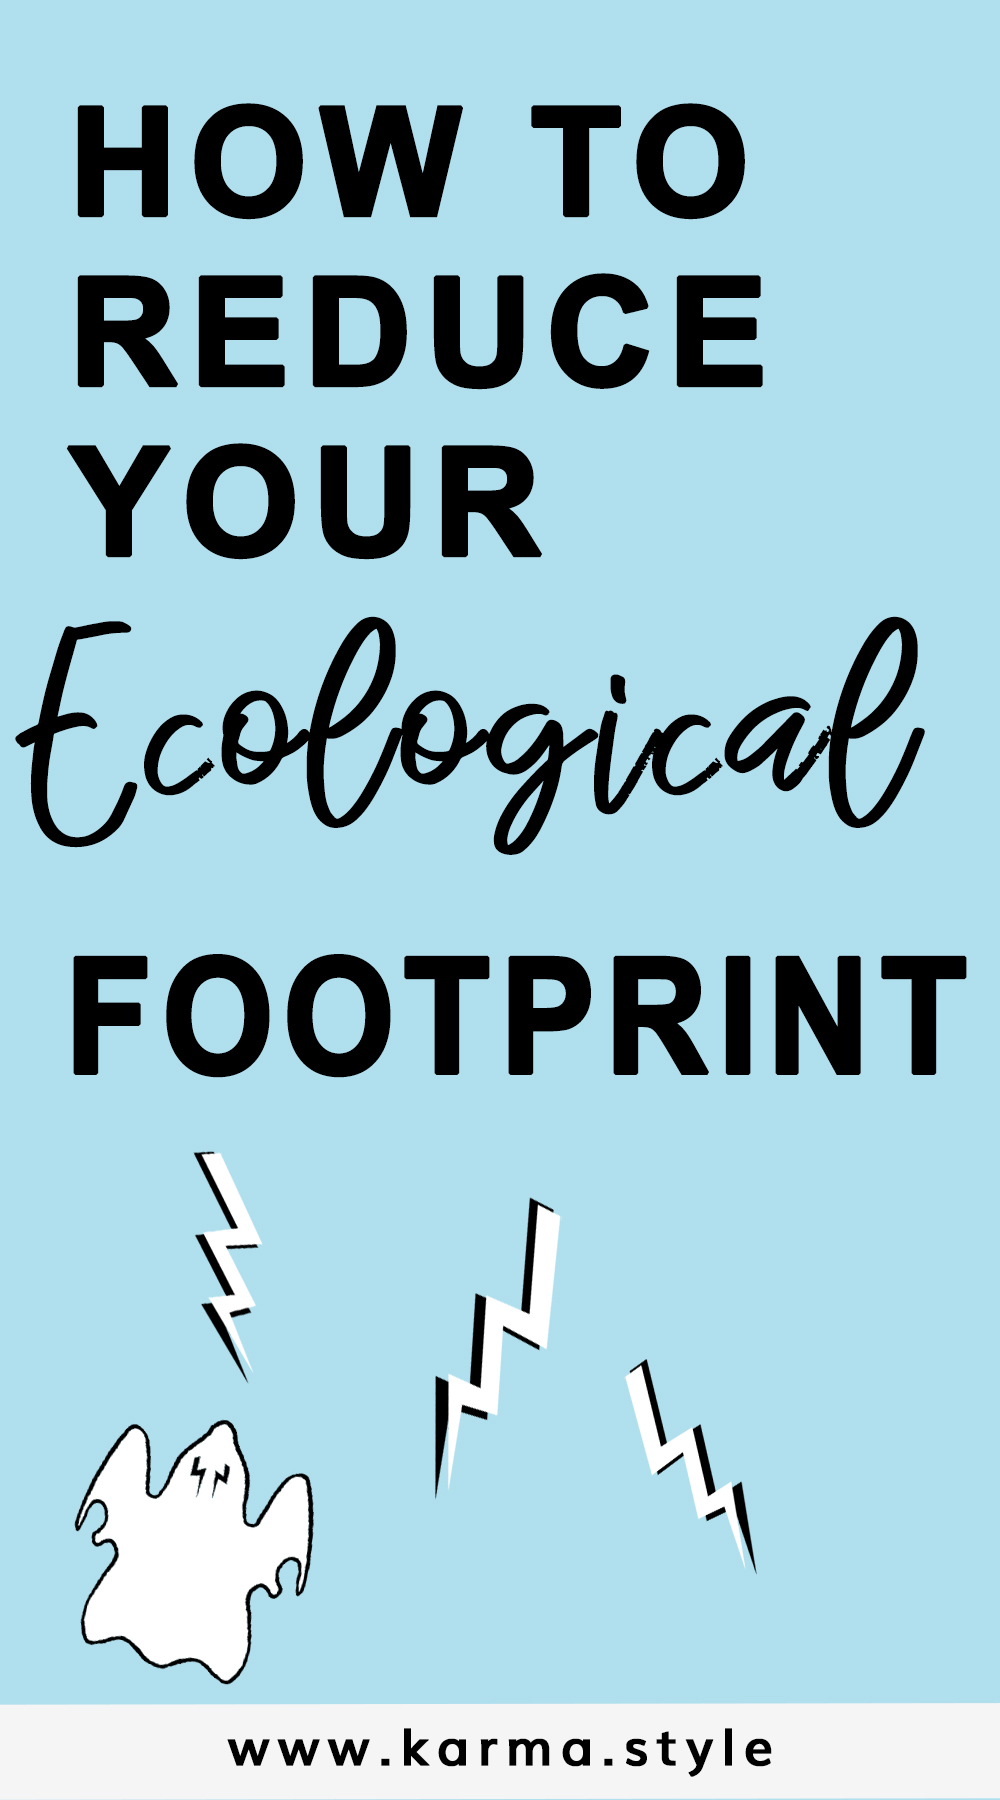 How to reduce ecological footprint